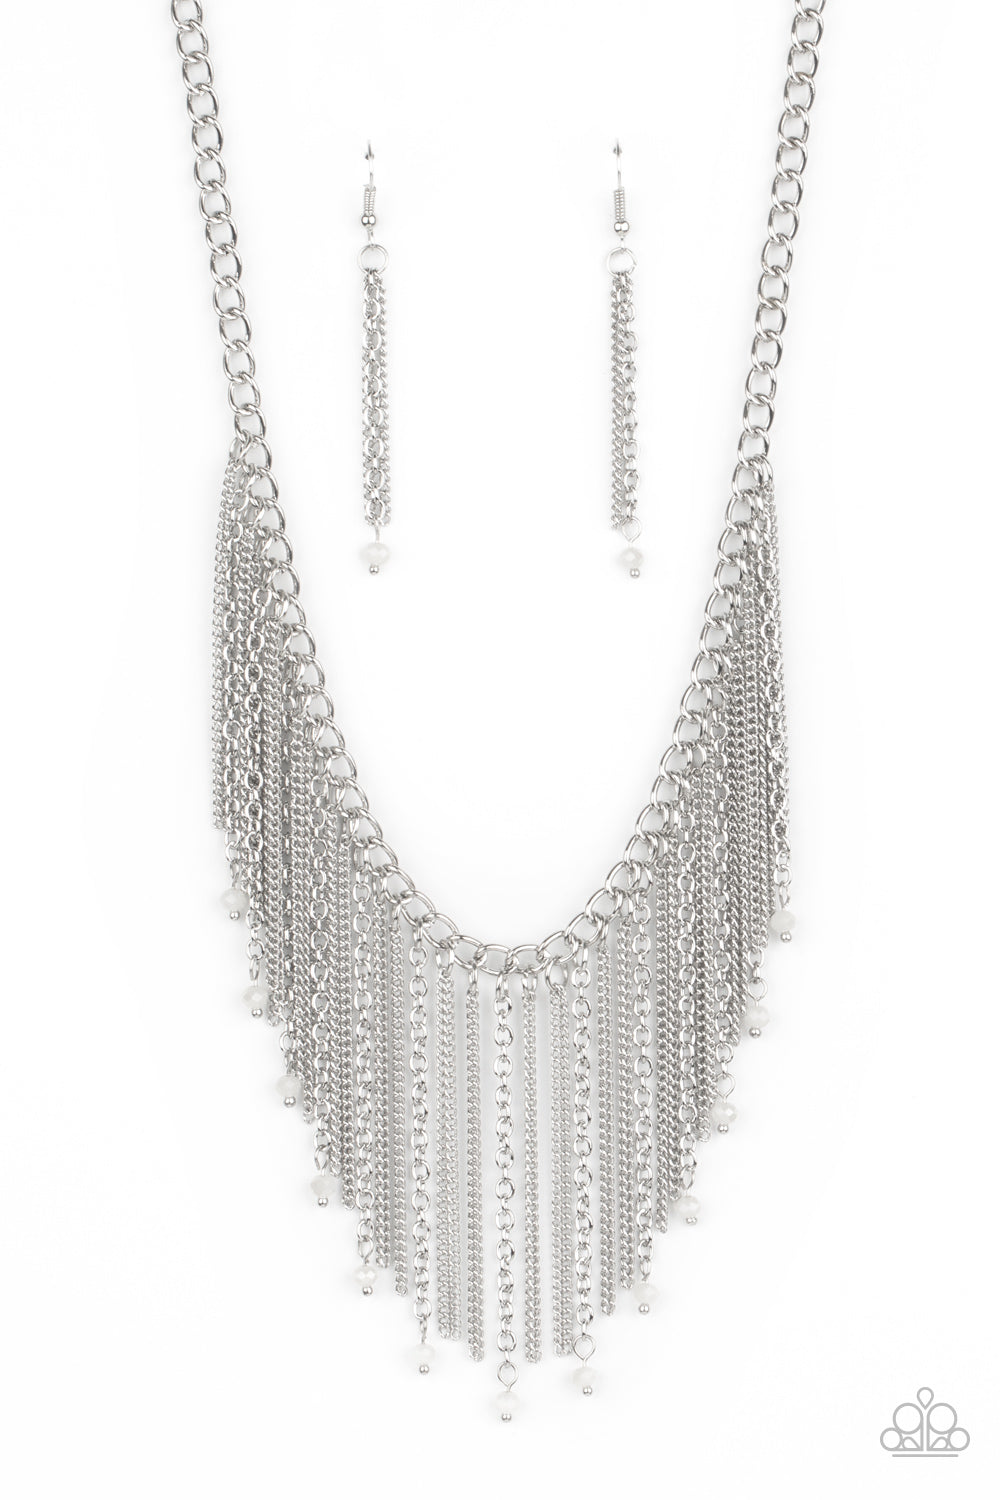 Cue the Fireworks - white - Paparazzi necklace